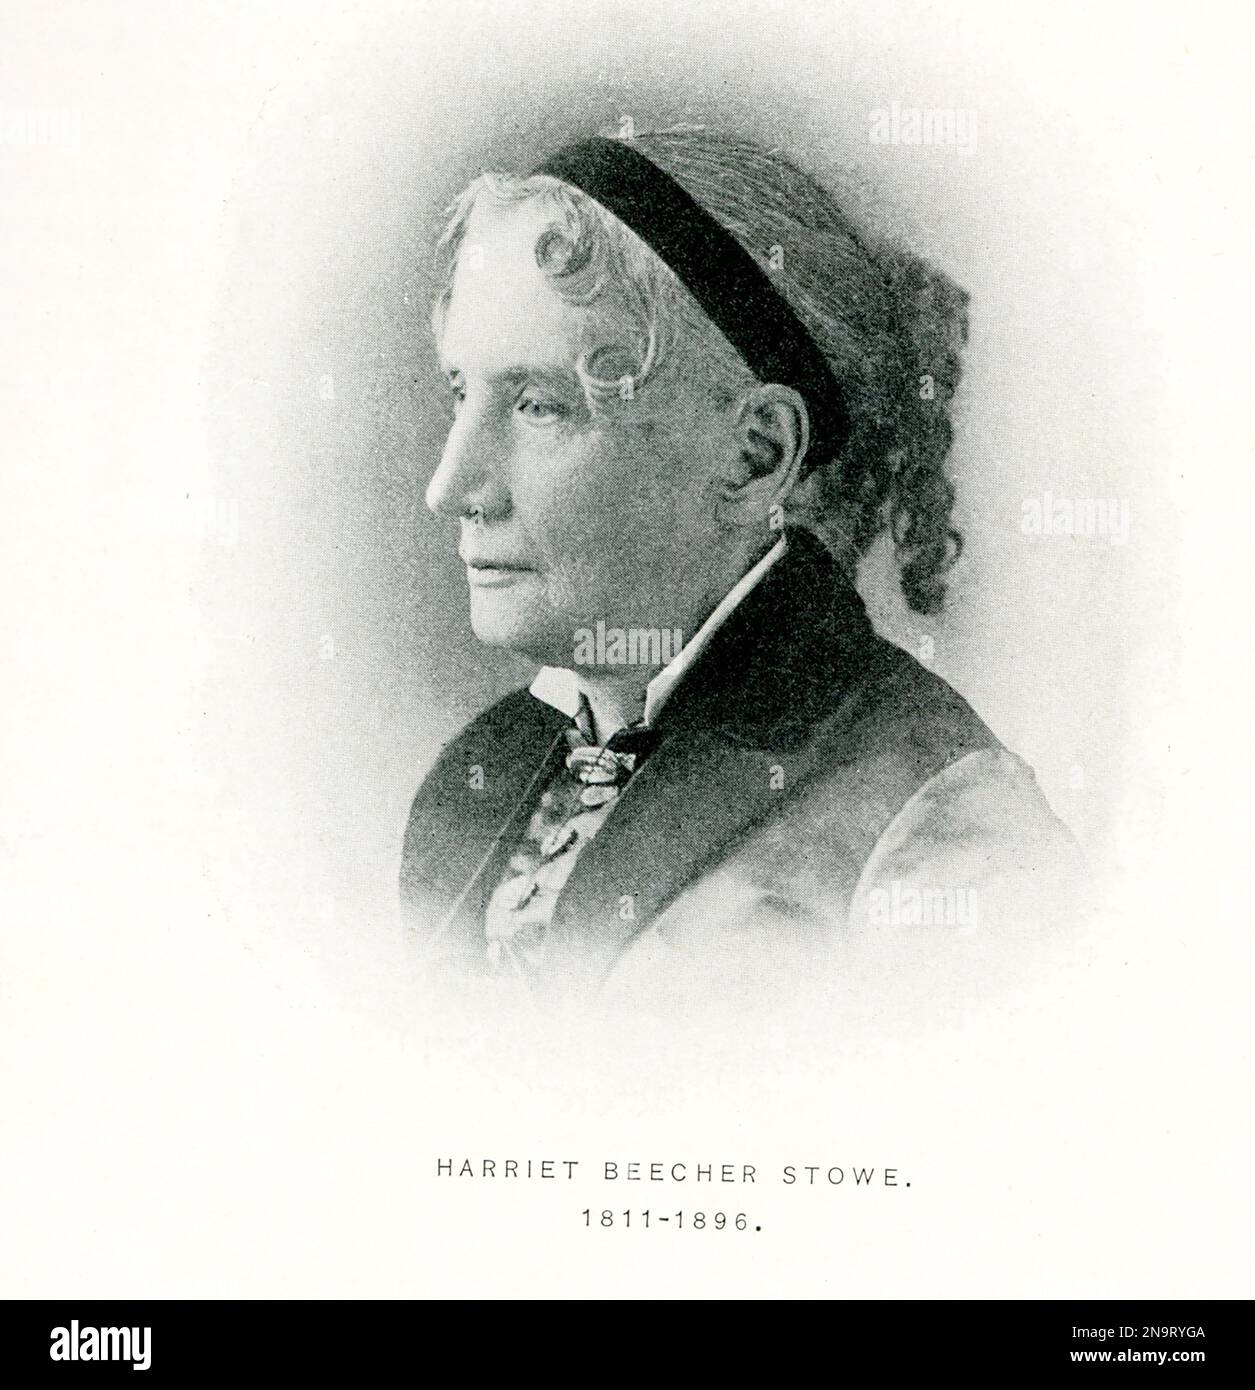 American writer and abolitionist Harriet Beecher Stowe wrote the novel 'Uncle Tom's Cabin' (with the subtitle of 'Life among the Lowly'). The novel was first published in 1852 and is credited as laying the groundwork for the Civil War. The tales in the novel revolve around Uncle Tom, a long-suffering black slave. Stock Photo